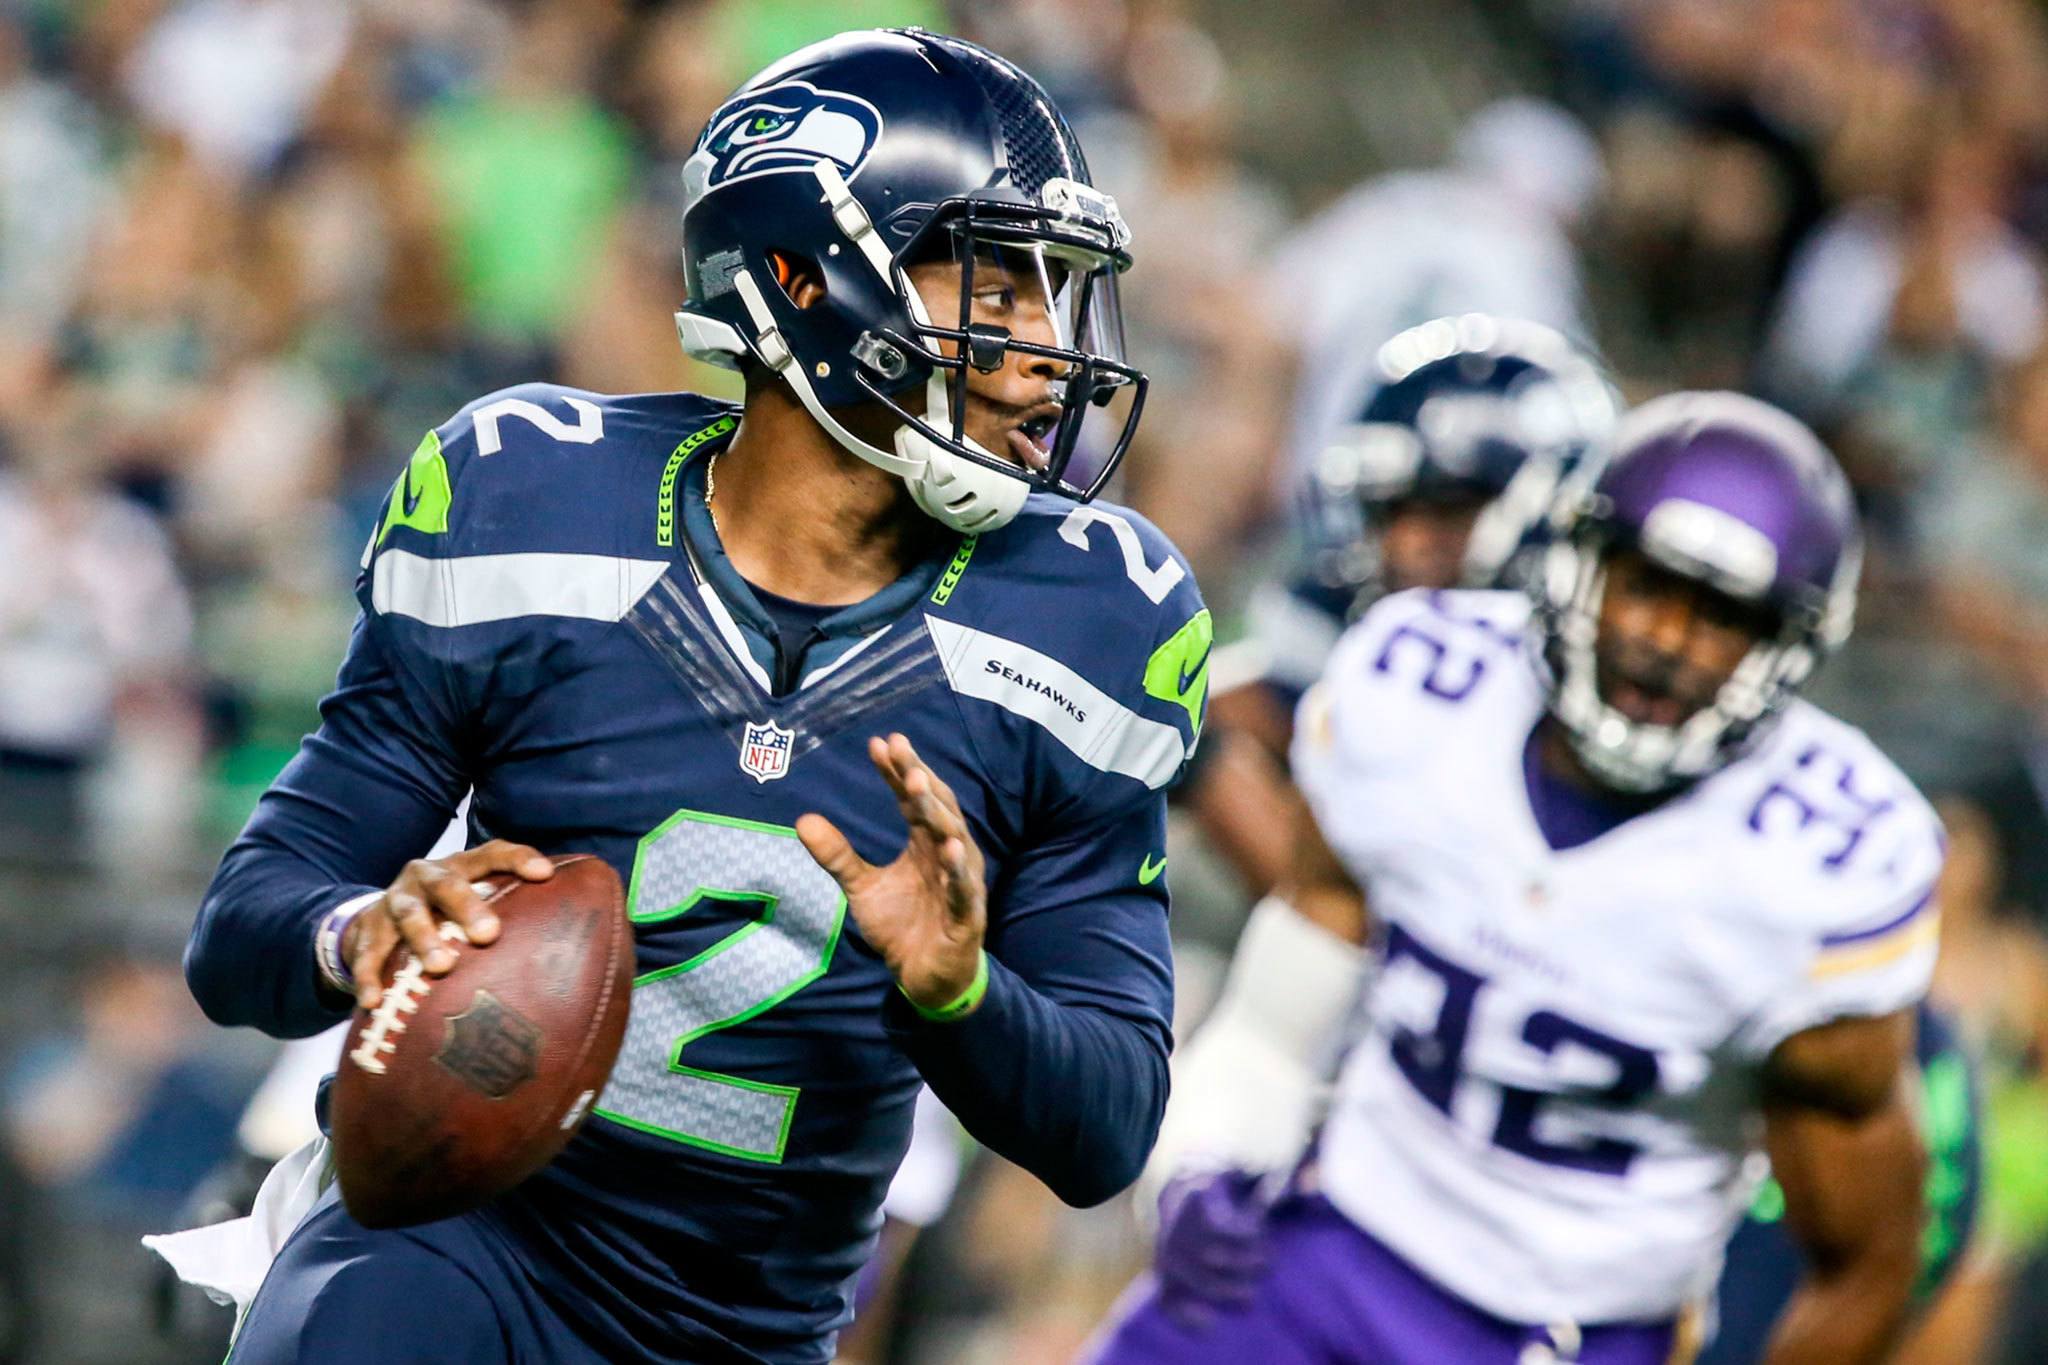 Seahawks Trevone Boykin looks to pass against the Minnesota Vikings Thursday night at Century Link Field in Seattle. (Kevin Clark / The Herald)